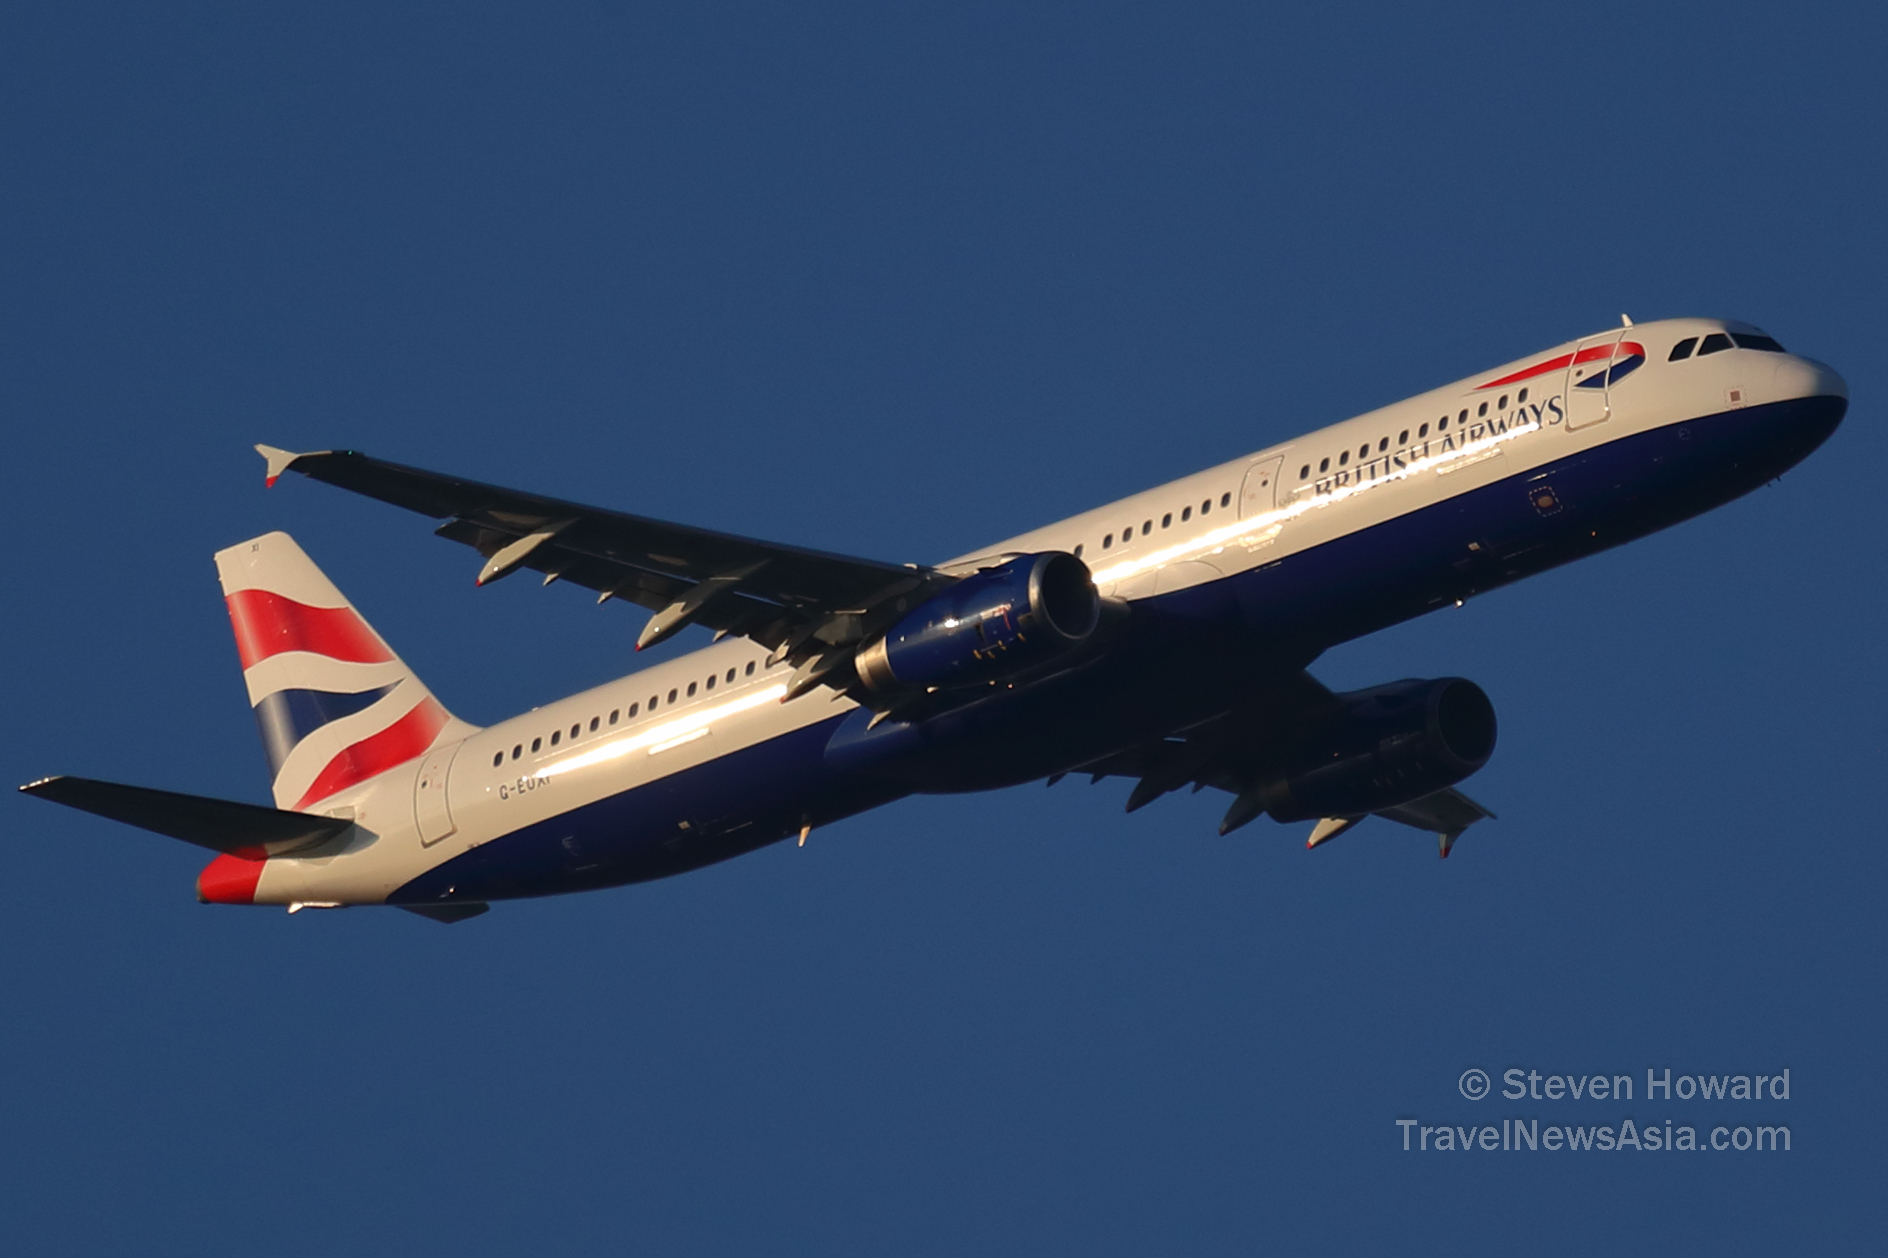 British Airways A321 reg: G-EUXI. Picture by Steven Howard of TravelNewsAsia.com Click to enlarge.